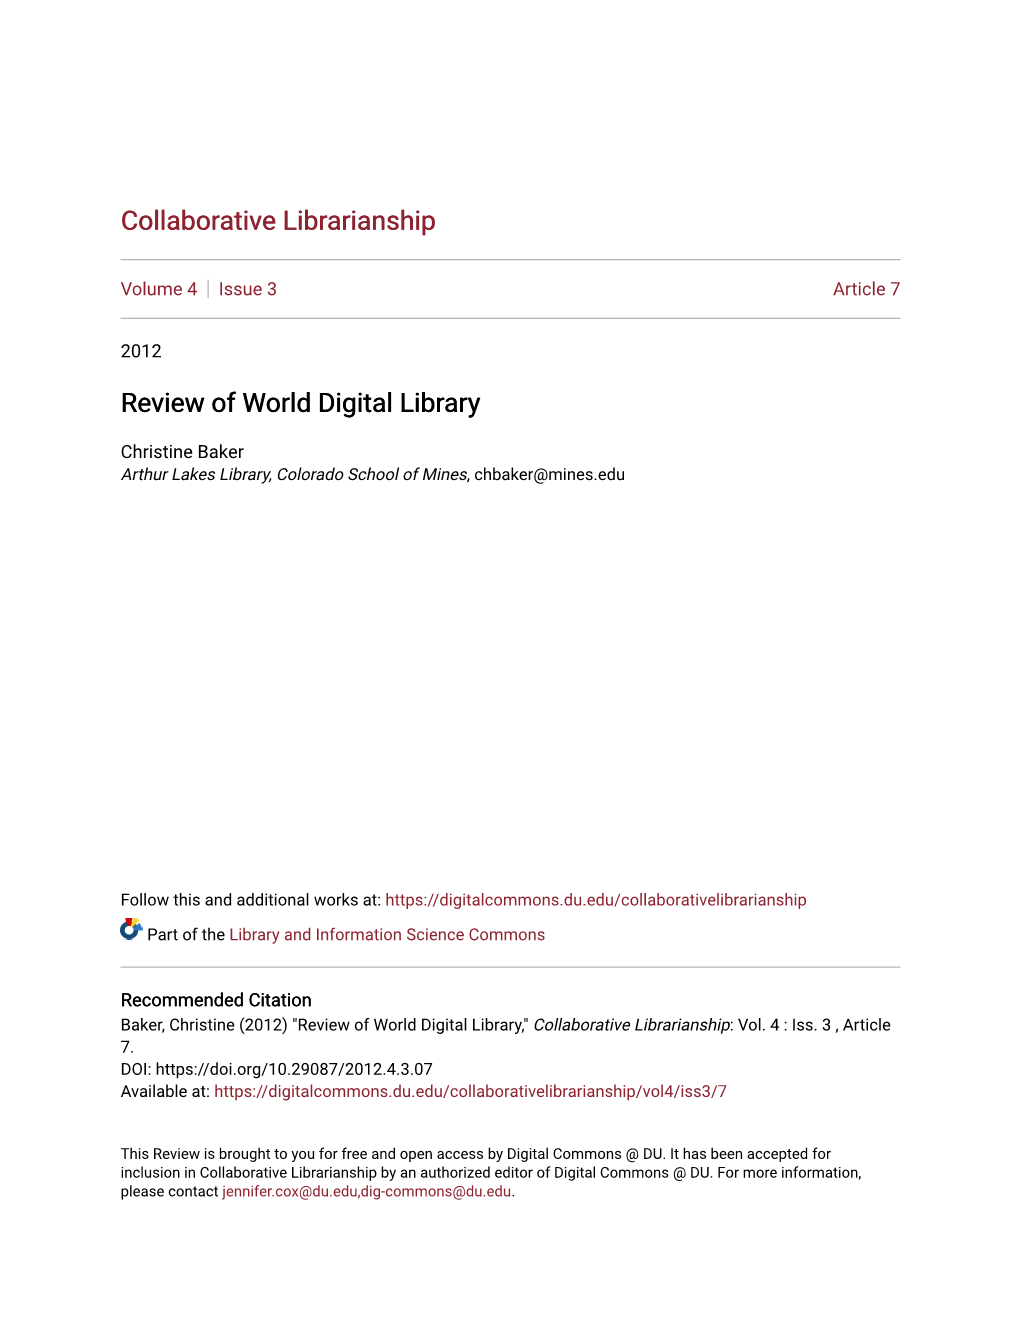 Review of World Digital Library